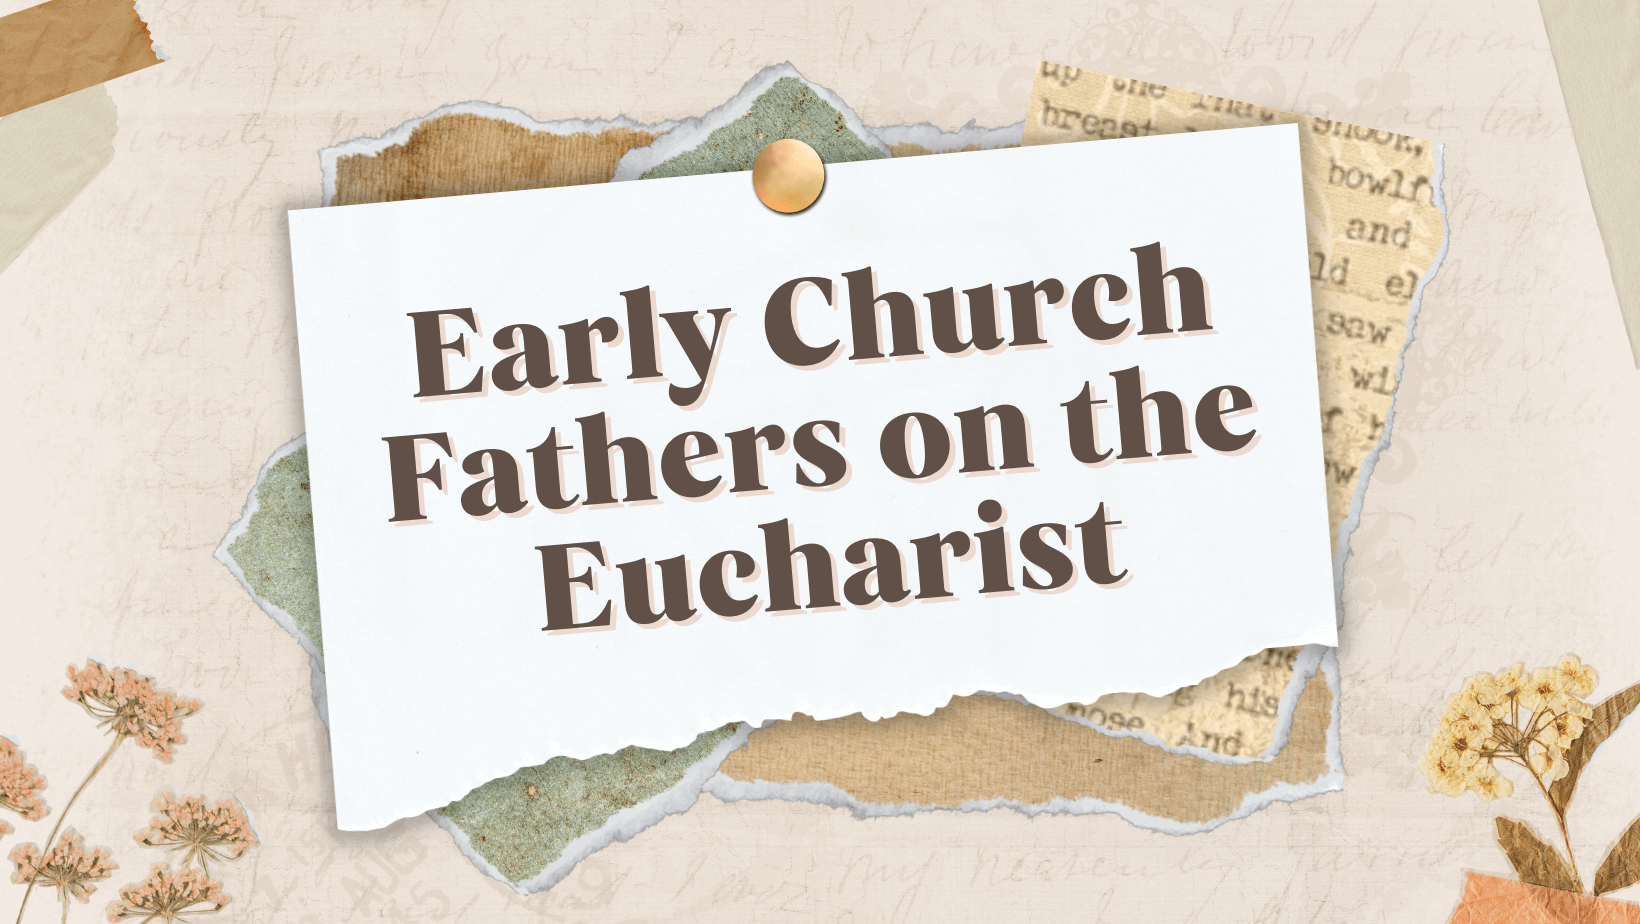 Early Church Fathers on the Eucharist